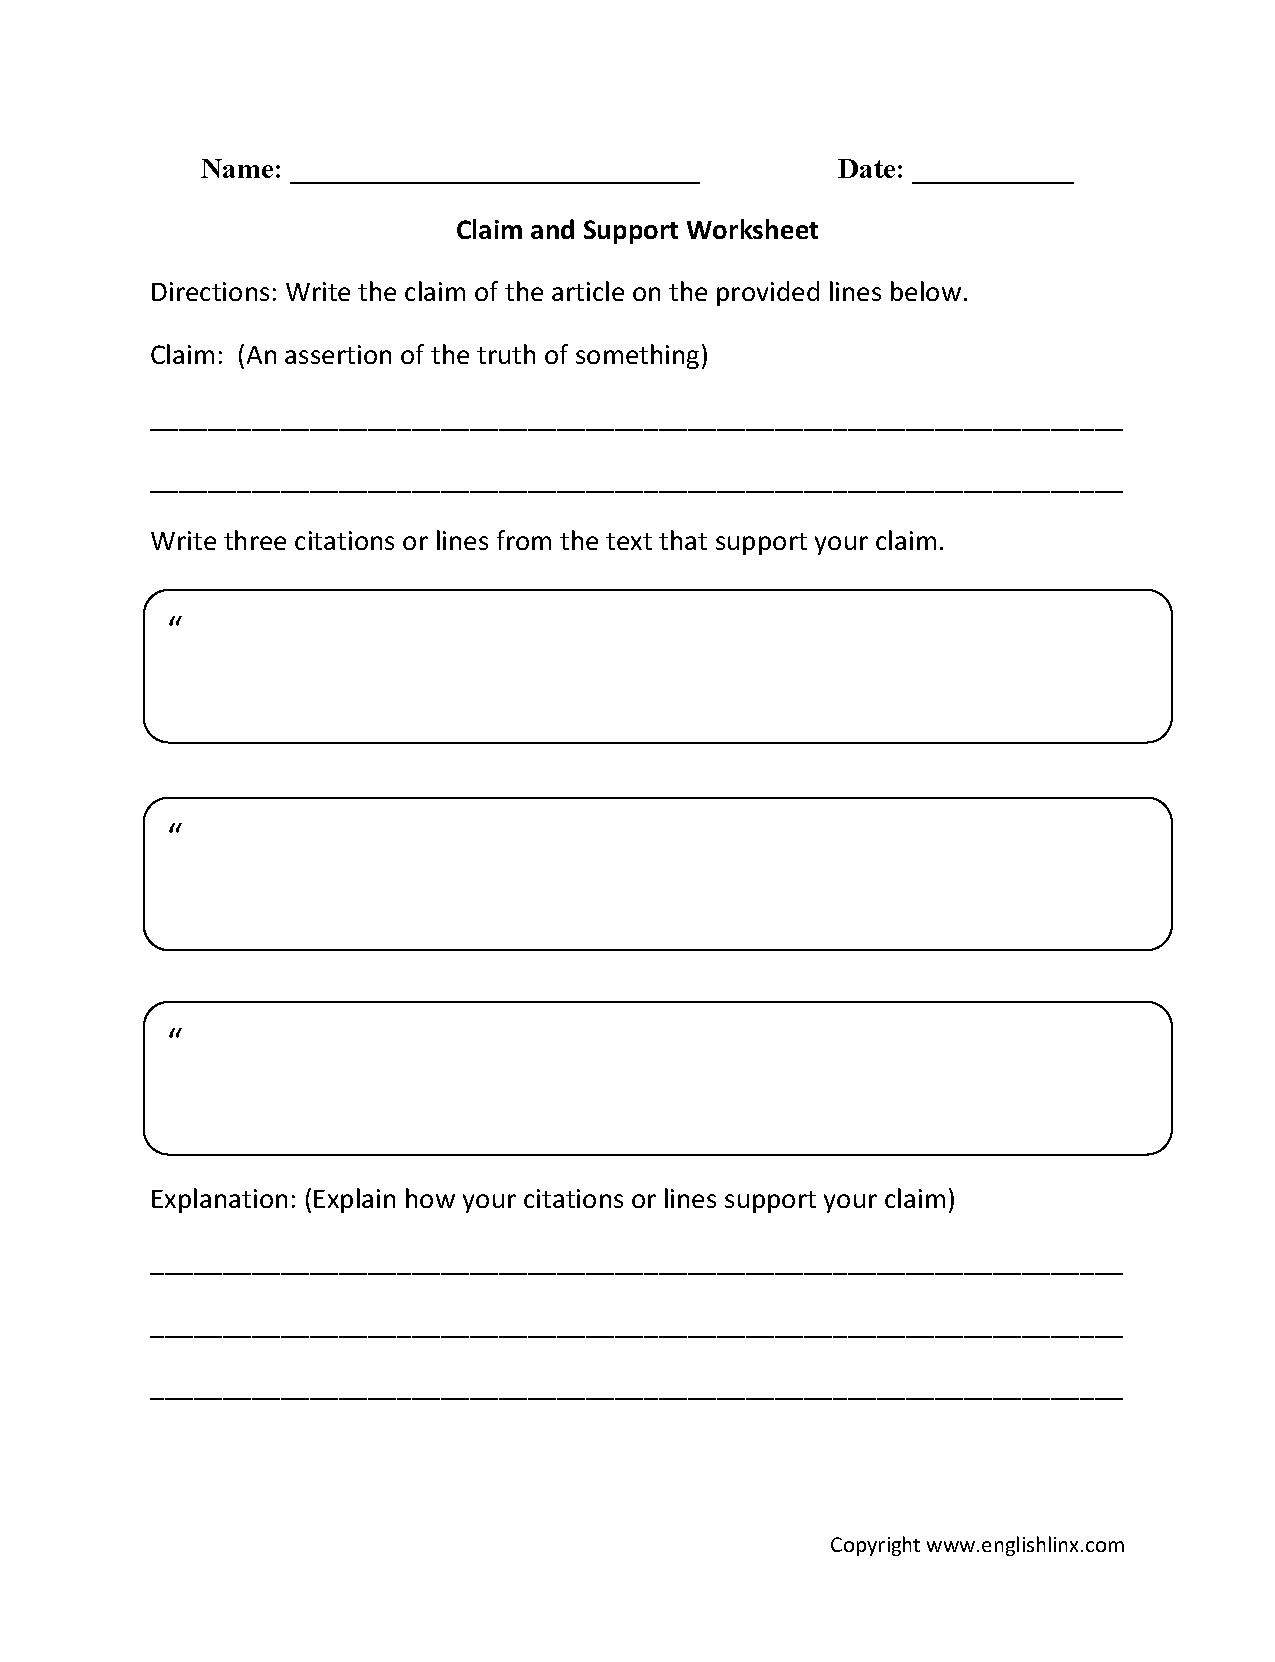 Claim and Support Reading Comprehension Worksheets